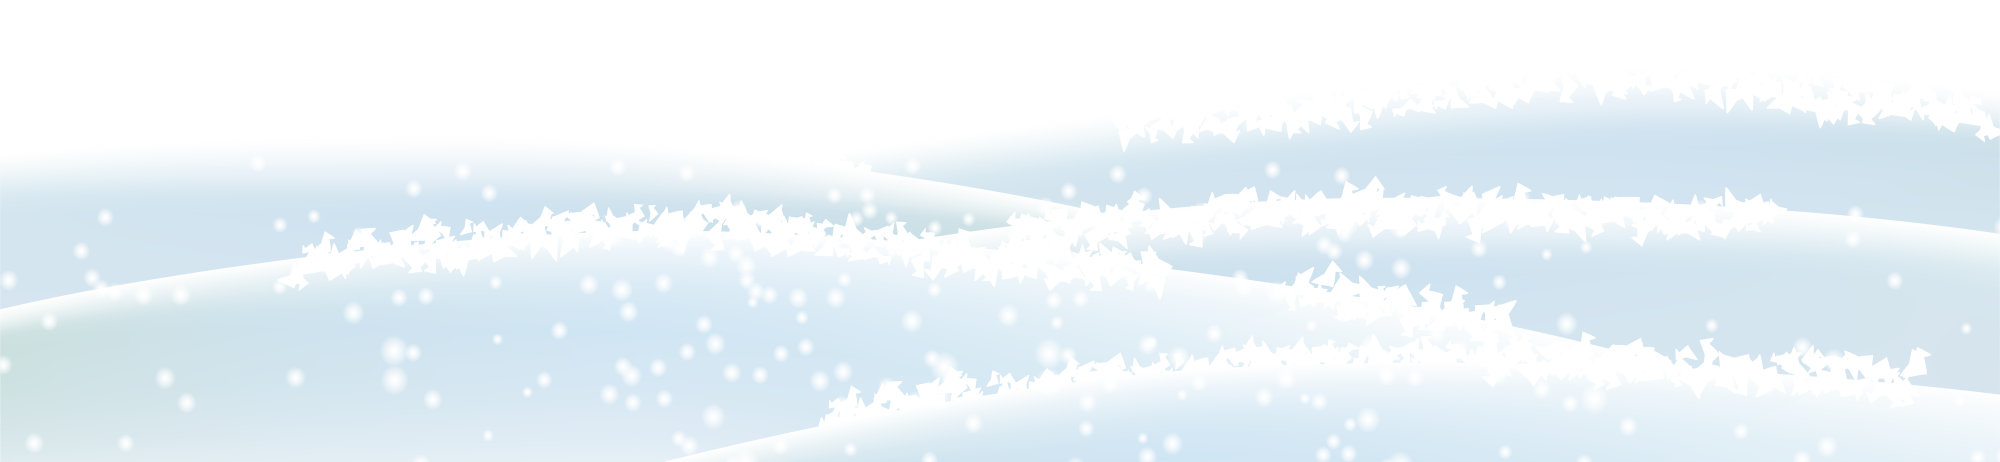 Snow on amazing national. Ground clipart snowy